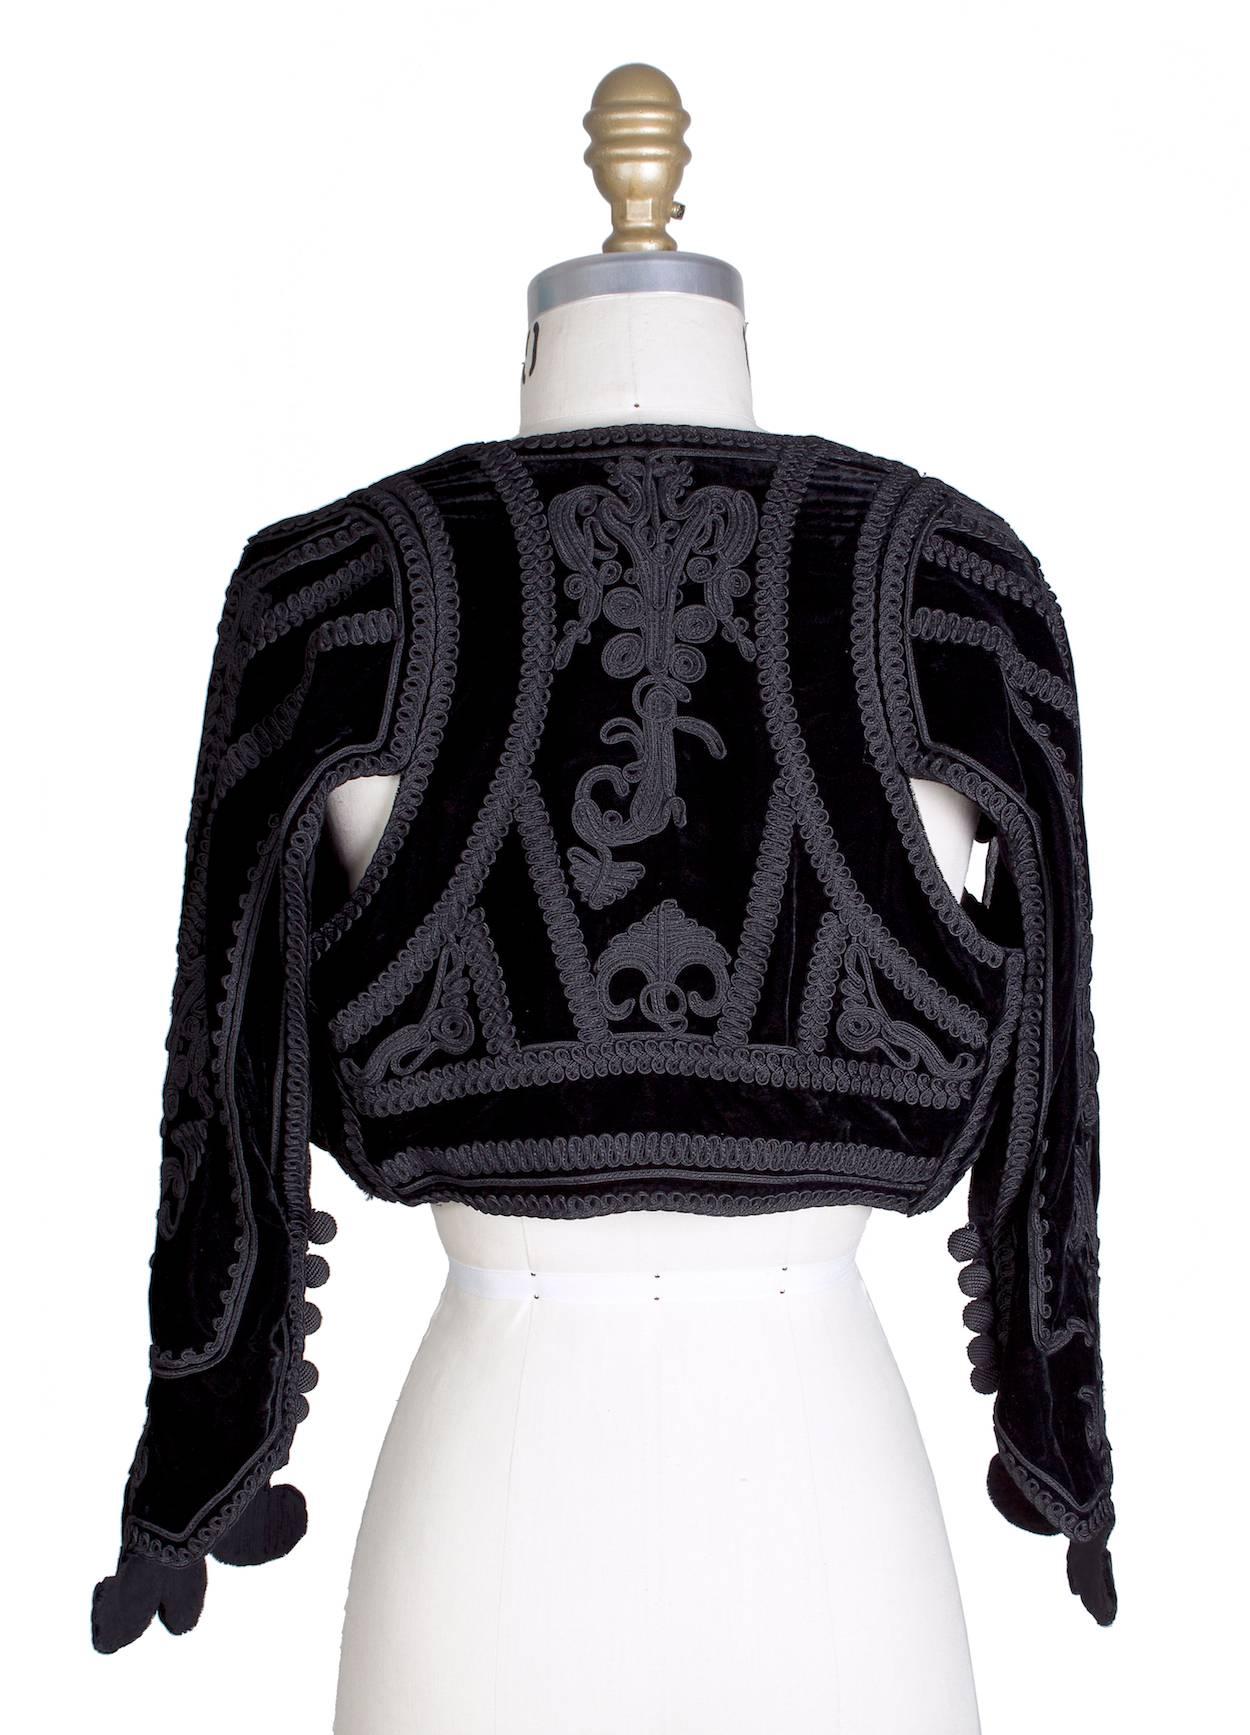 This is a black bolero jacket by Jean Paul Gaultier c. 1990s.  It features thick embroidery details all around.  

13